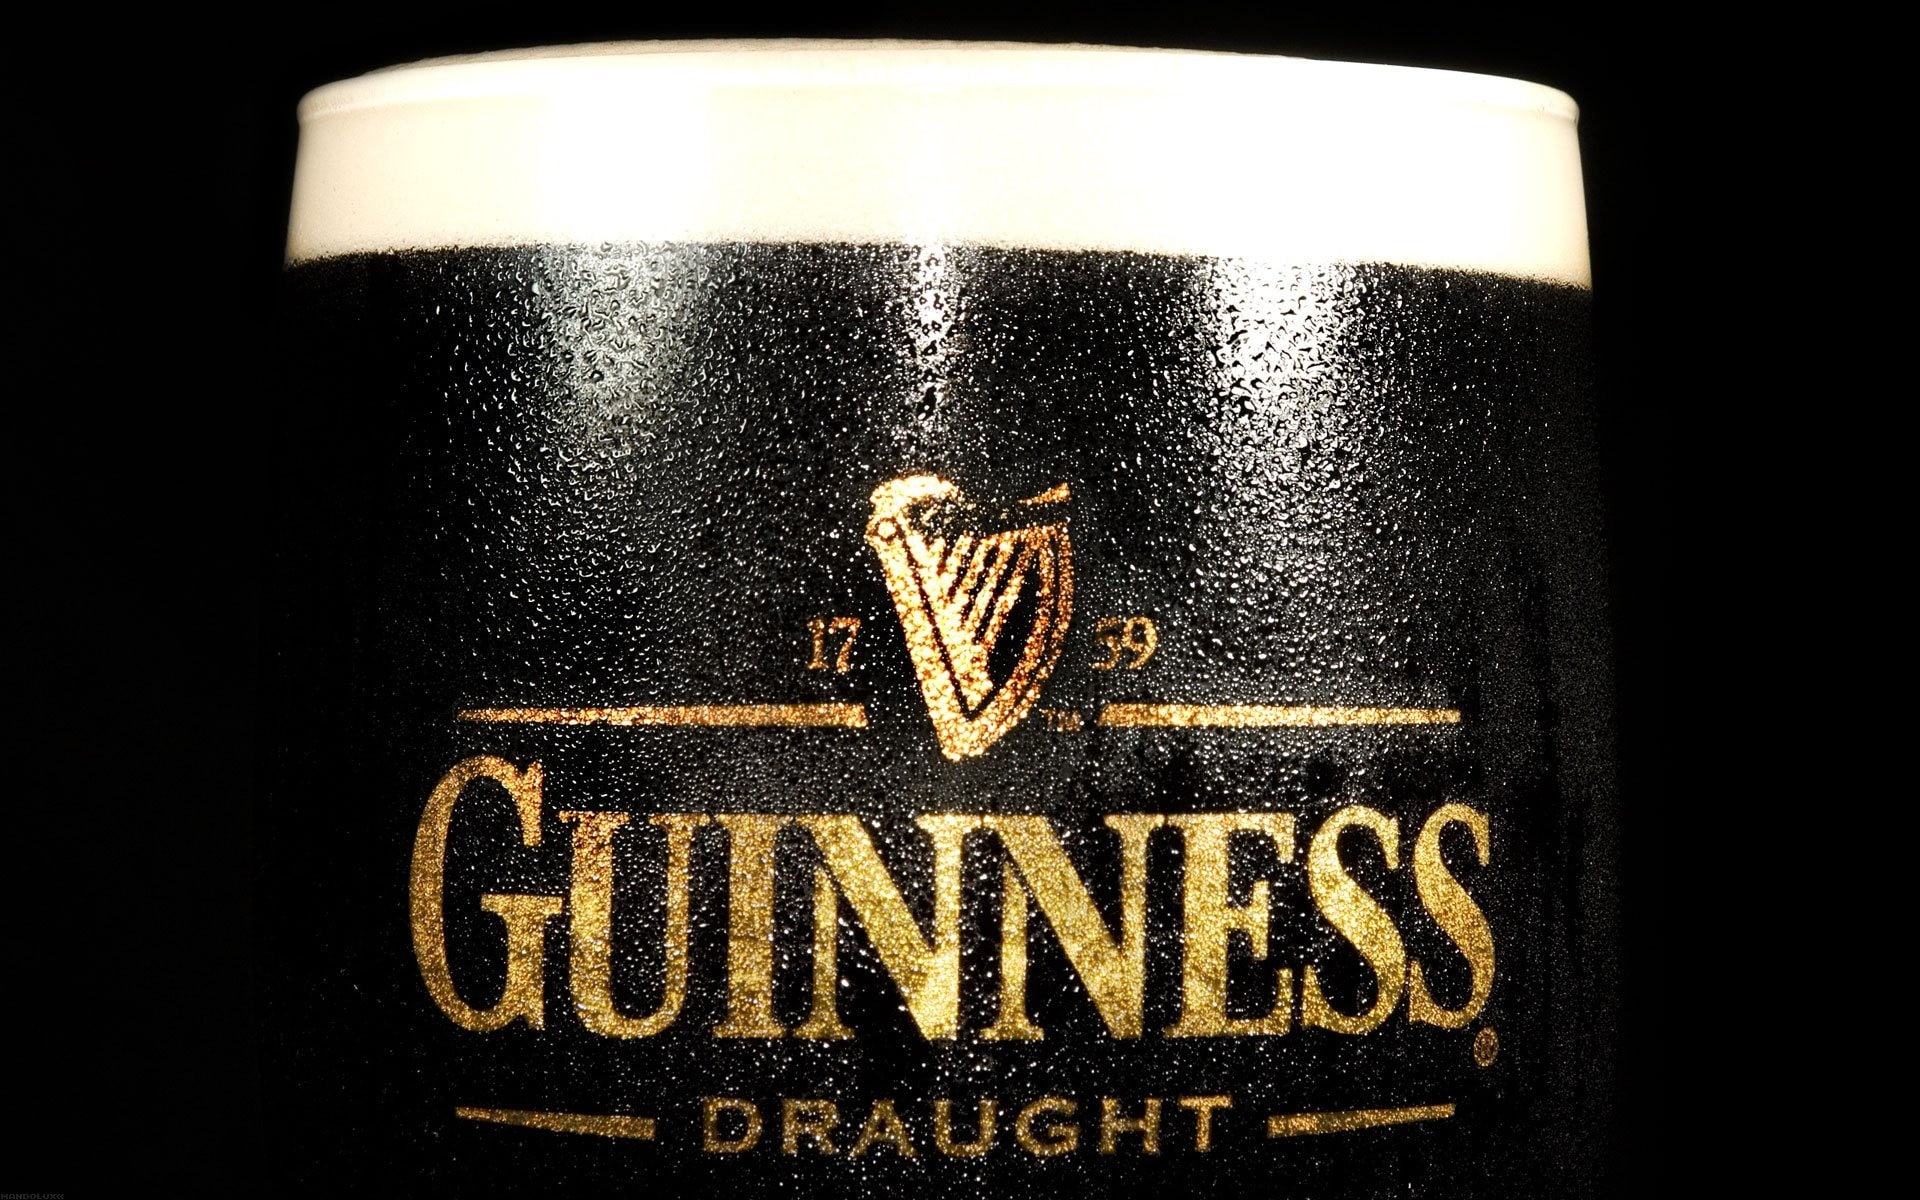 Guinness, beer, drink, alcohol